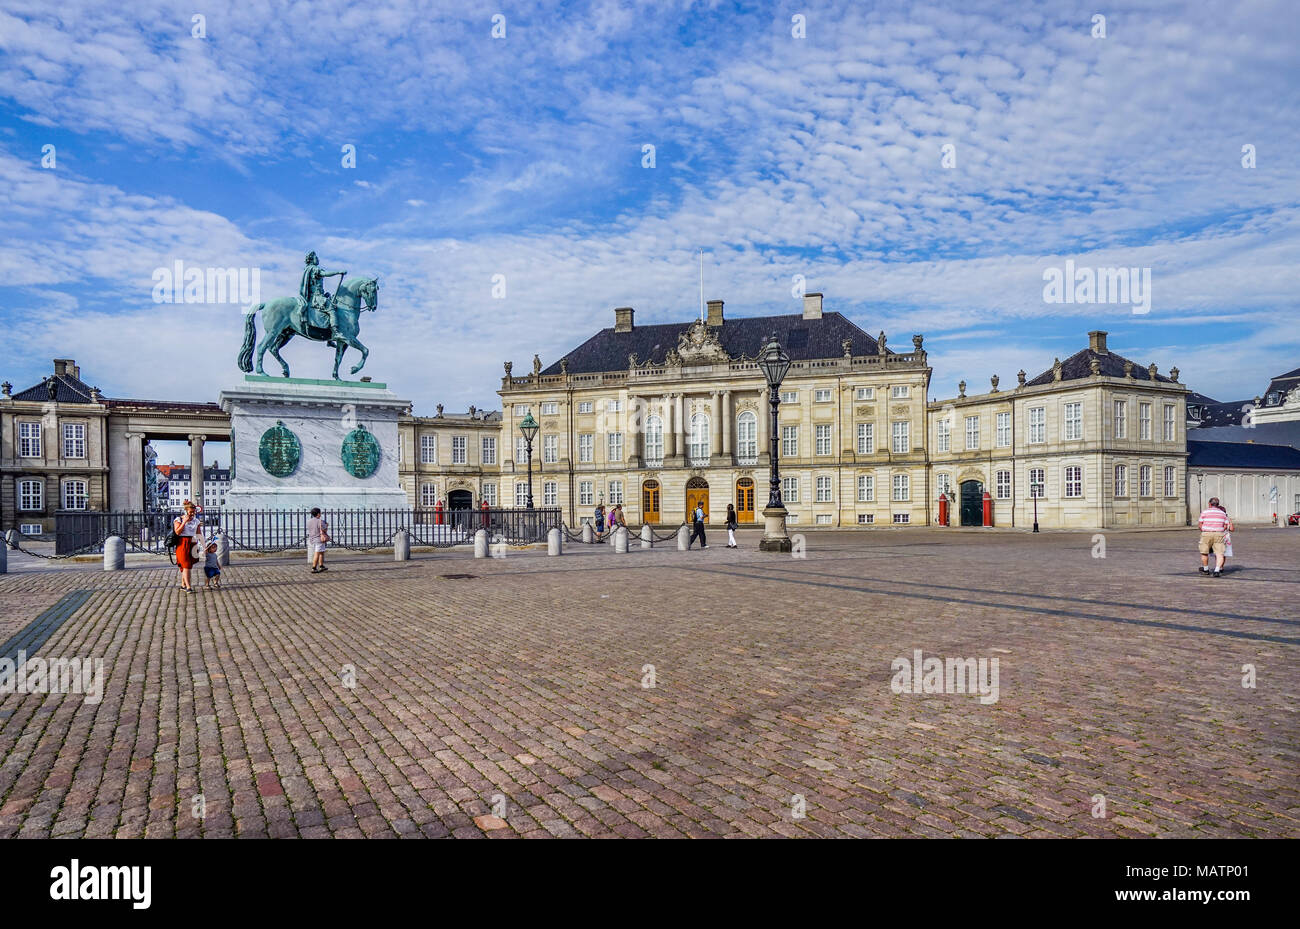 Amalienborg Palace Square (Amalienborg Slotsplads) with the equestrian statue of King Frederick V and the Christian VII's Palace, also known as Moltke Stock Photo